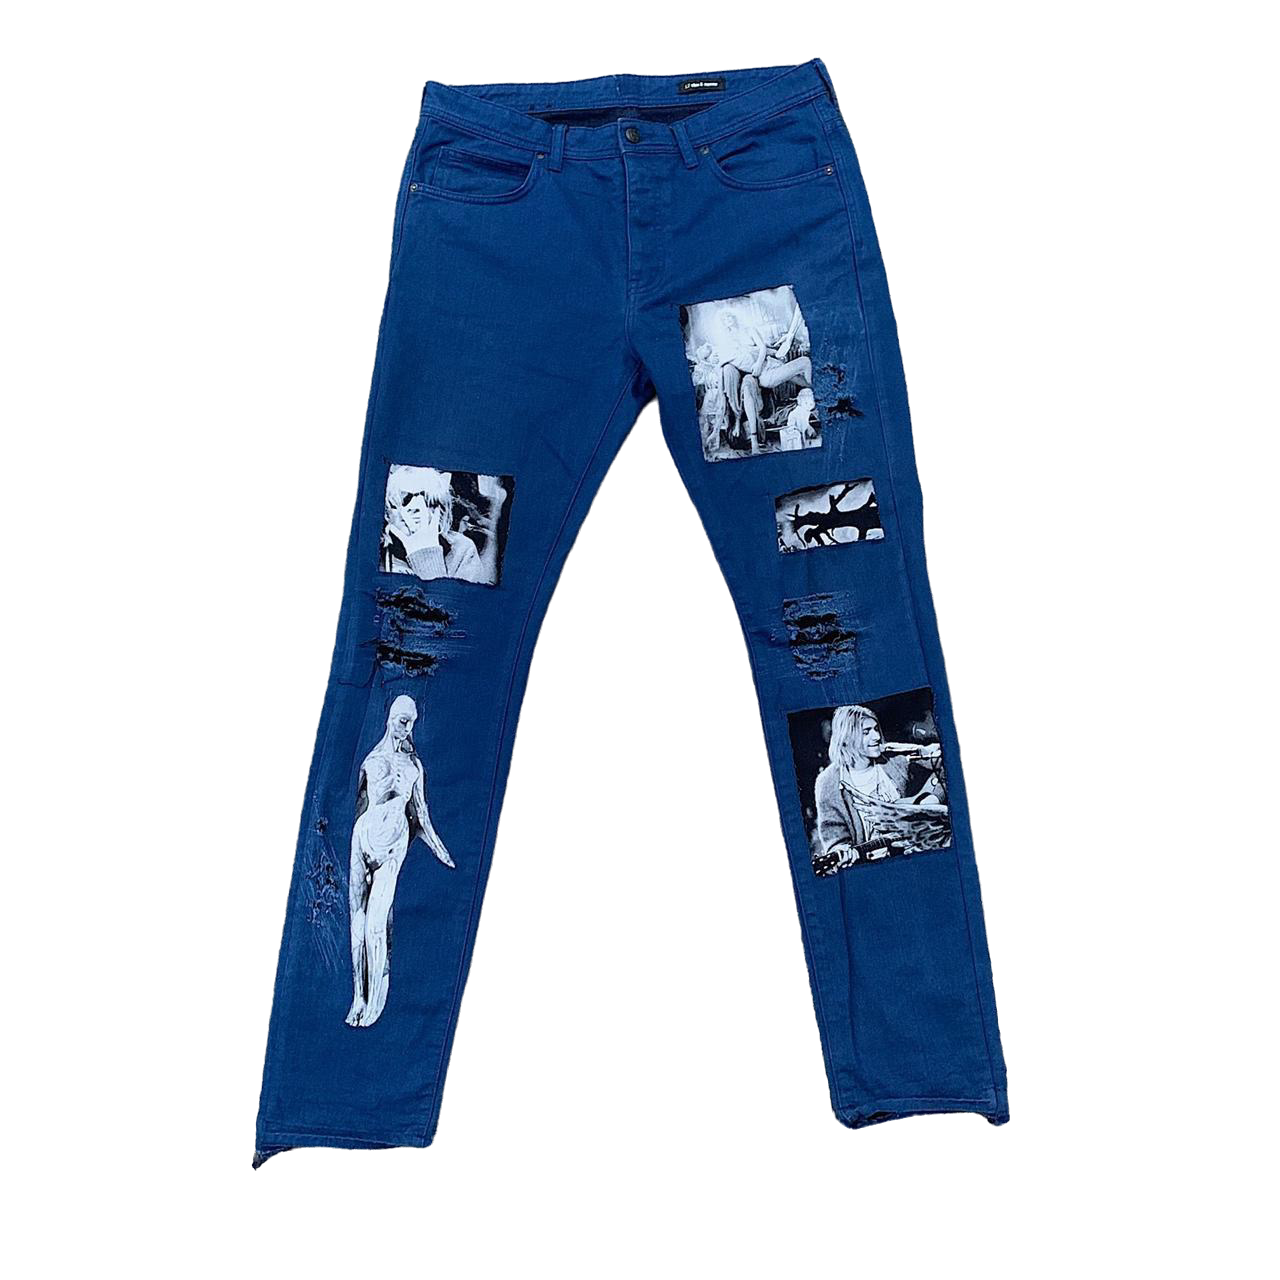 Hand Painted/Customized Jeans. Unique Piece.No Copies Made. Anime Theme.  Fan Art | eBay